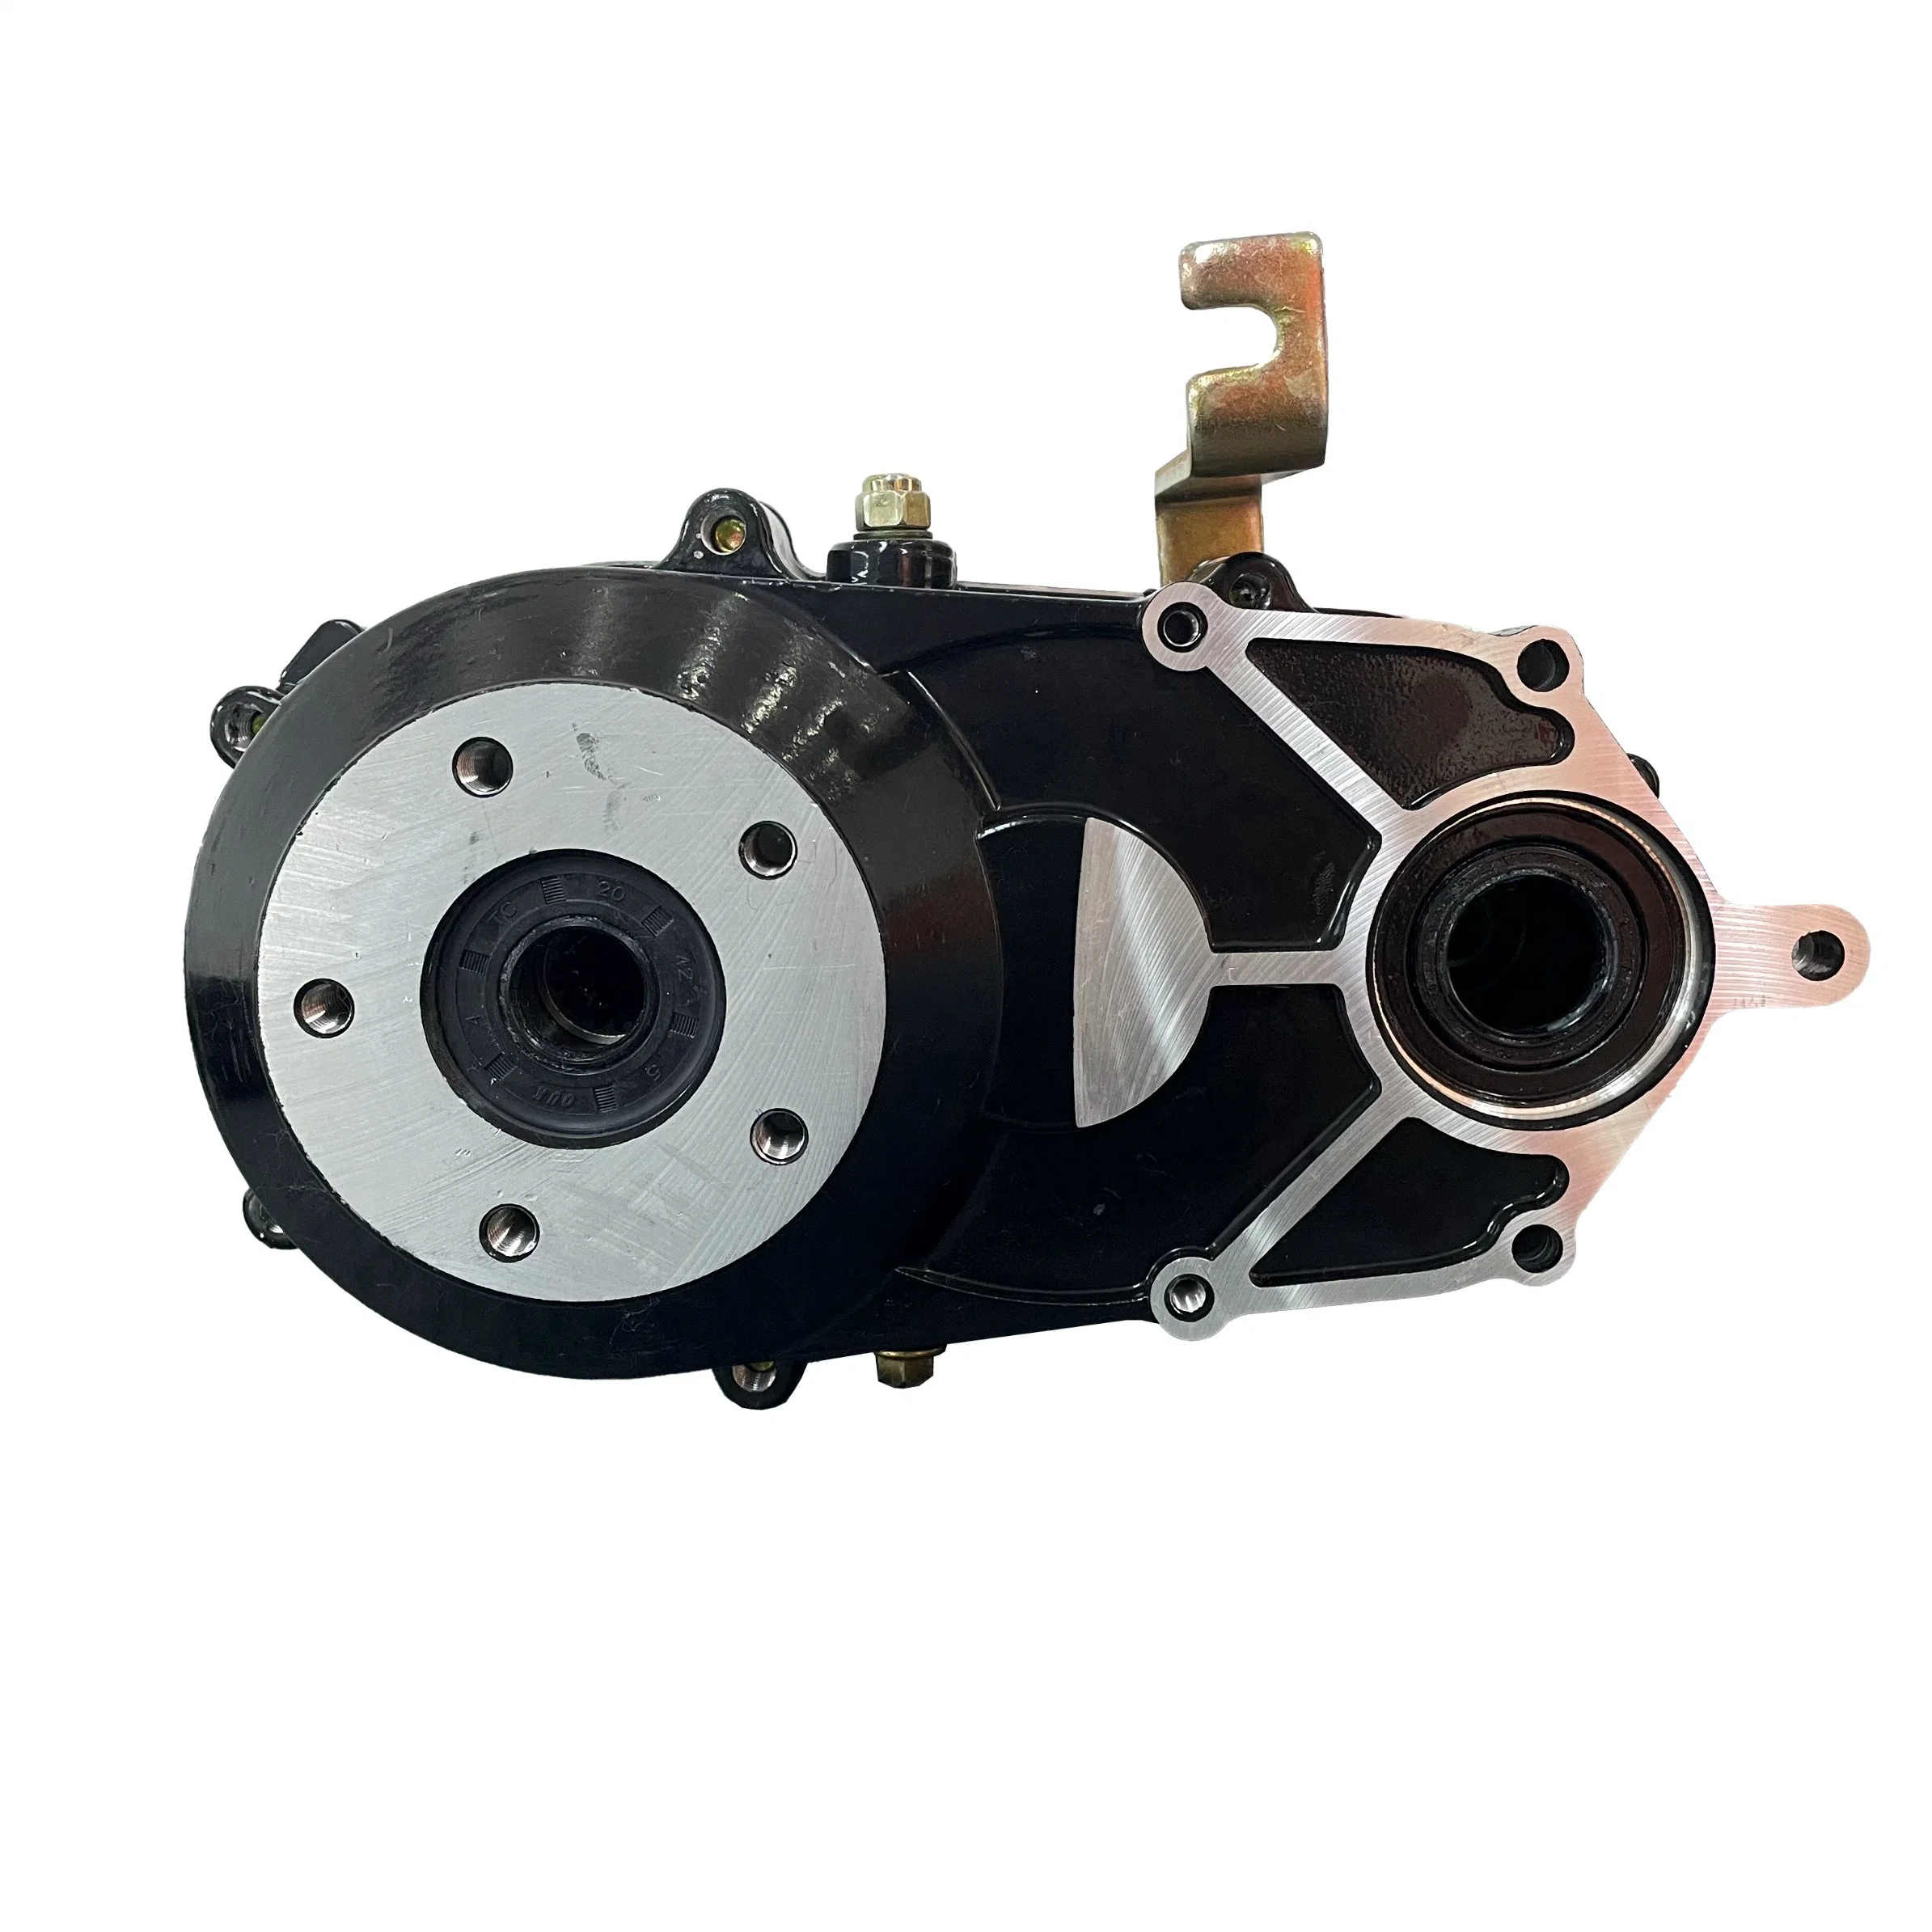 High Quality Gear Box for E-Bike Electric Vehicle Two Speed and Single Speed Motor Gear Box